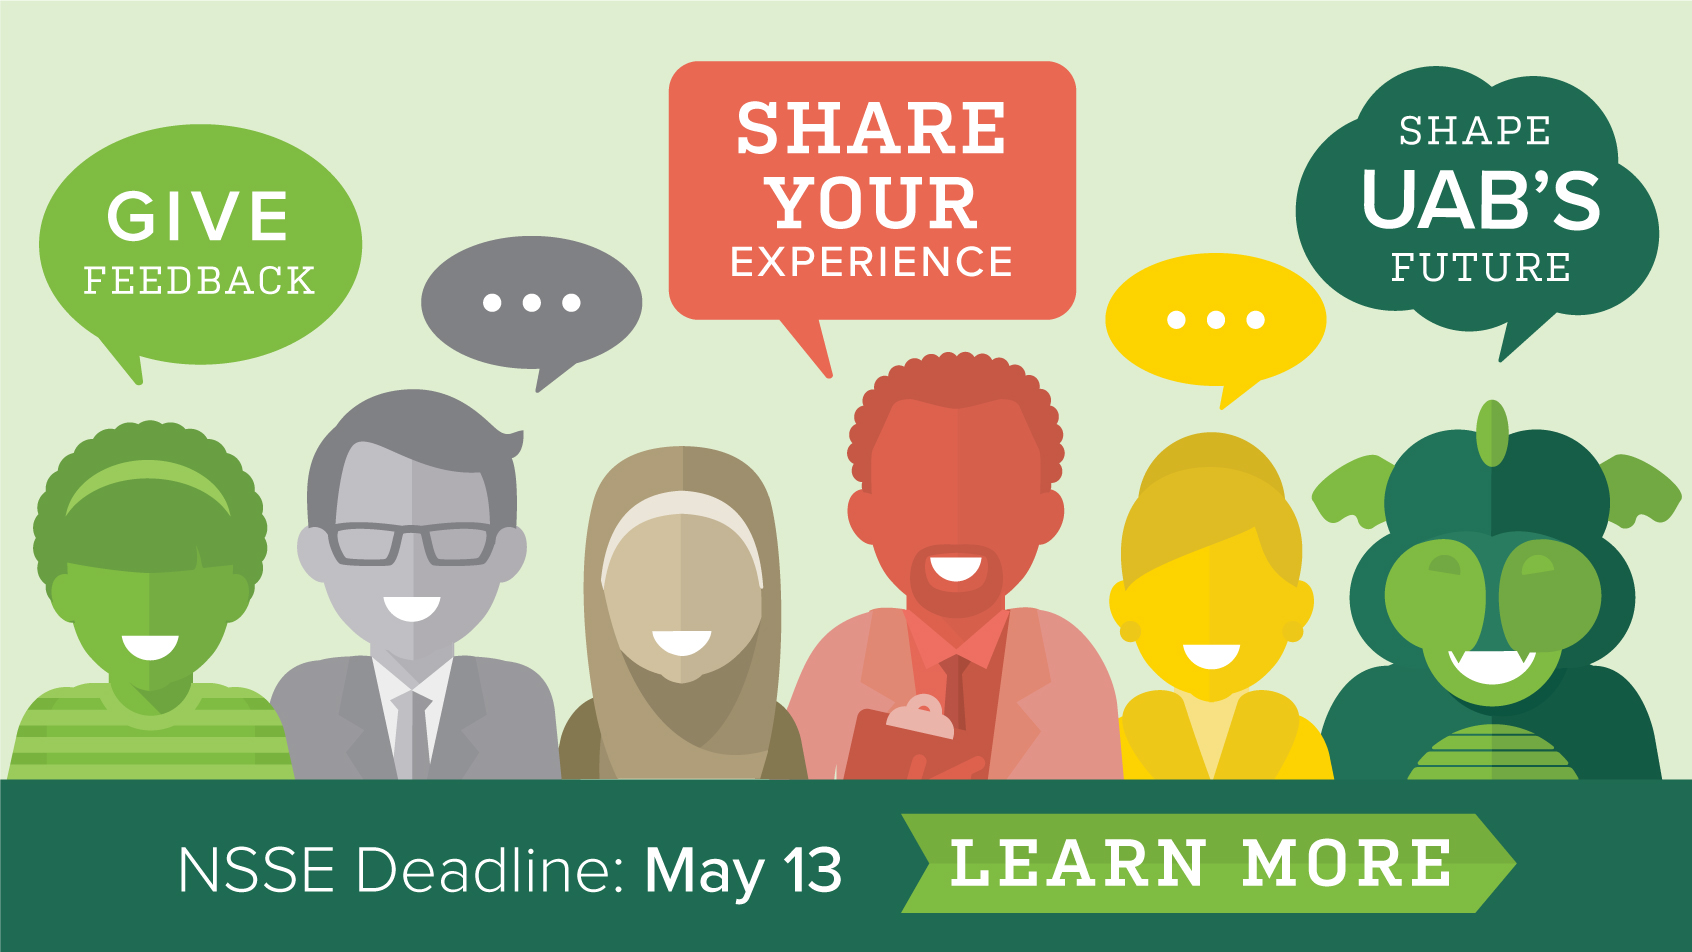 Give feedback. Share your experience. Shape UAB's future. NSSE deadline: May 13. Learn more.